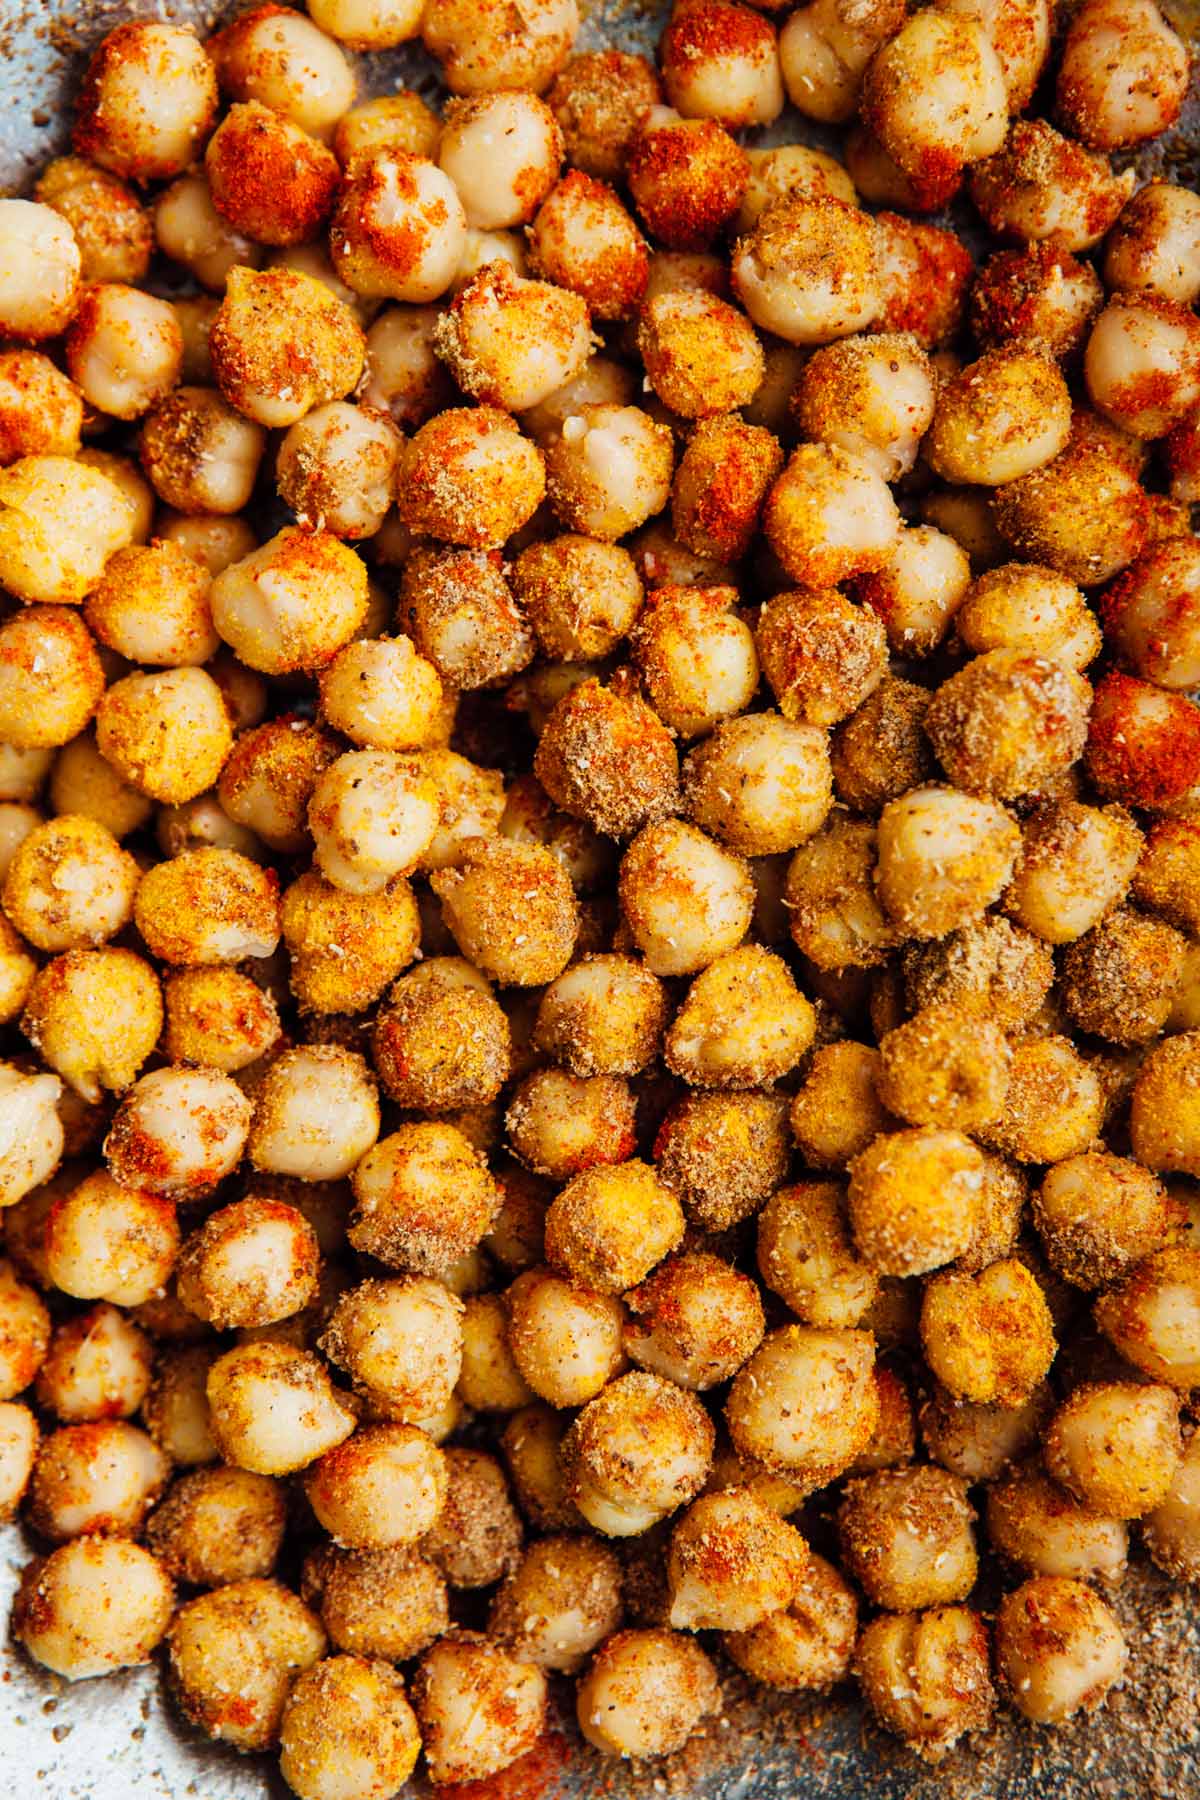 Rinsed and dried chickpeas, partially tossed with oil and spices, ready to be roasted in the oven for chickpea tacos.